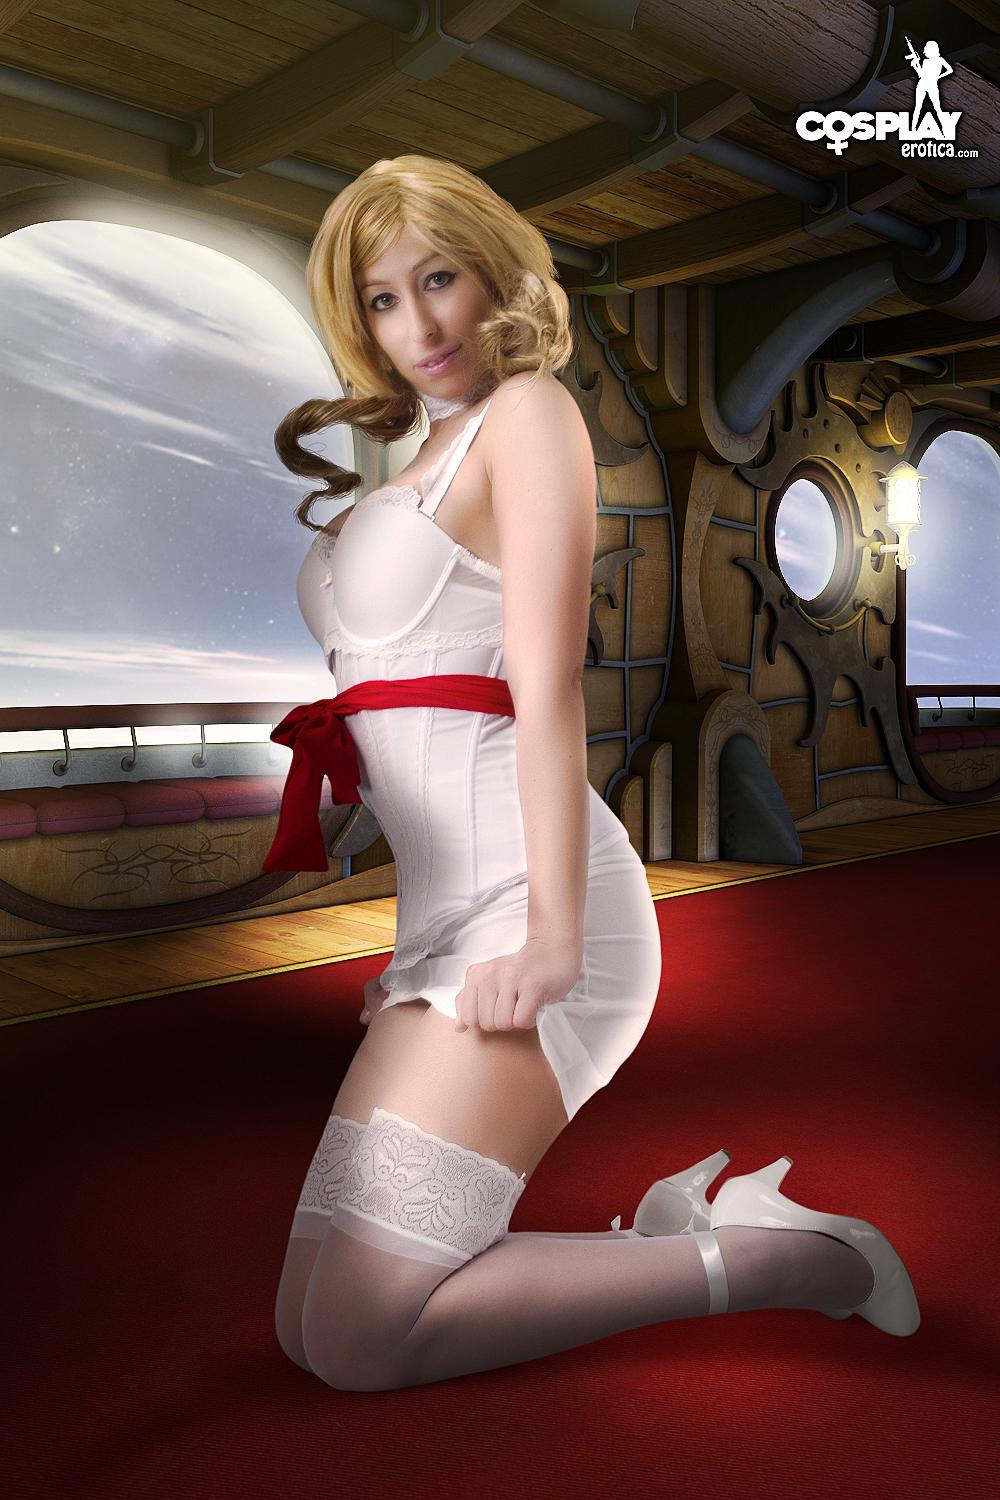 Cosplay babe sandy bell si veste come catherine
 #59902398